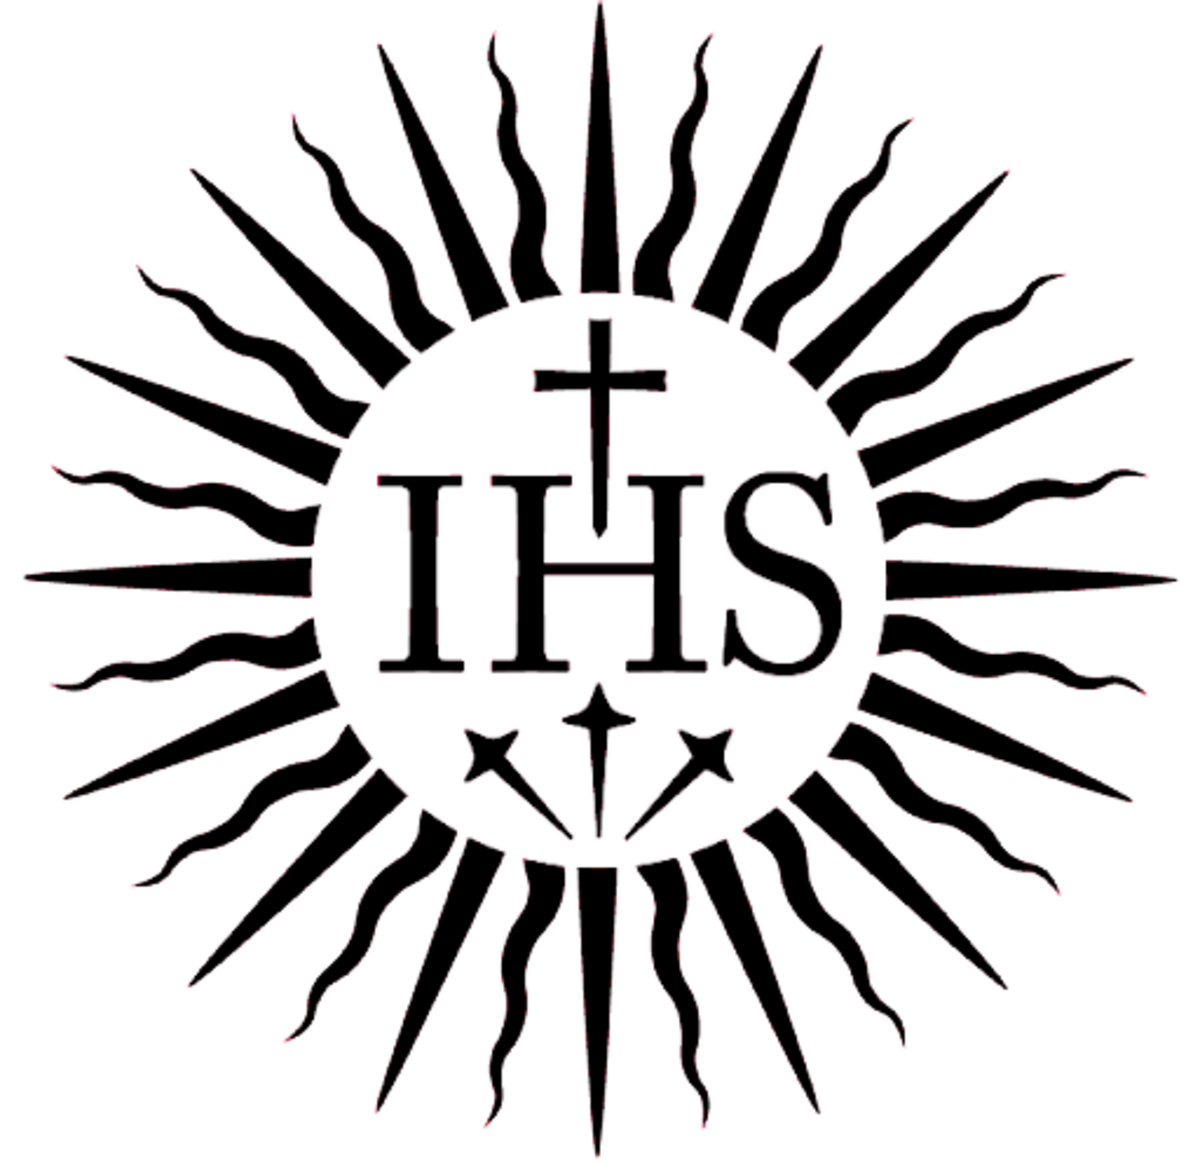 The standard of the Society of Jesus.